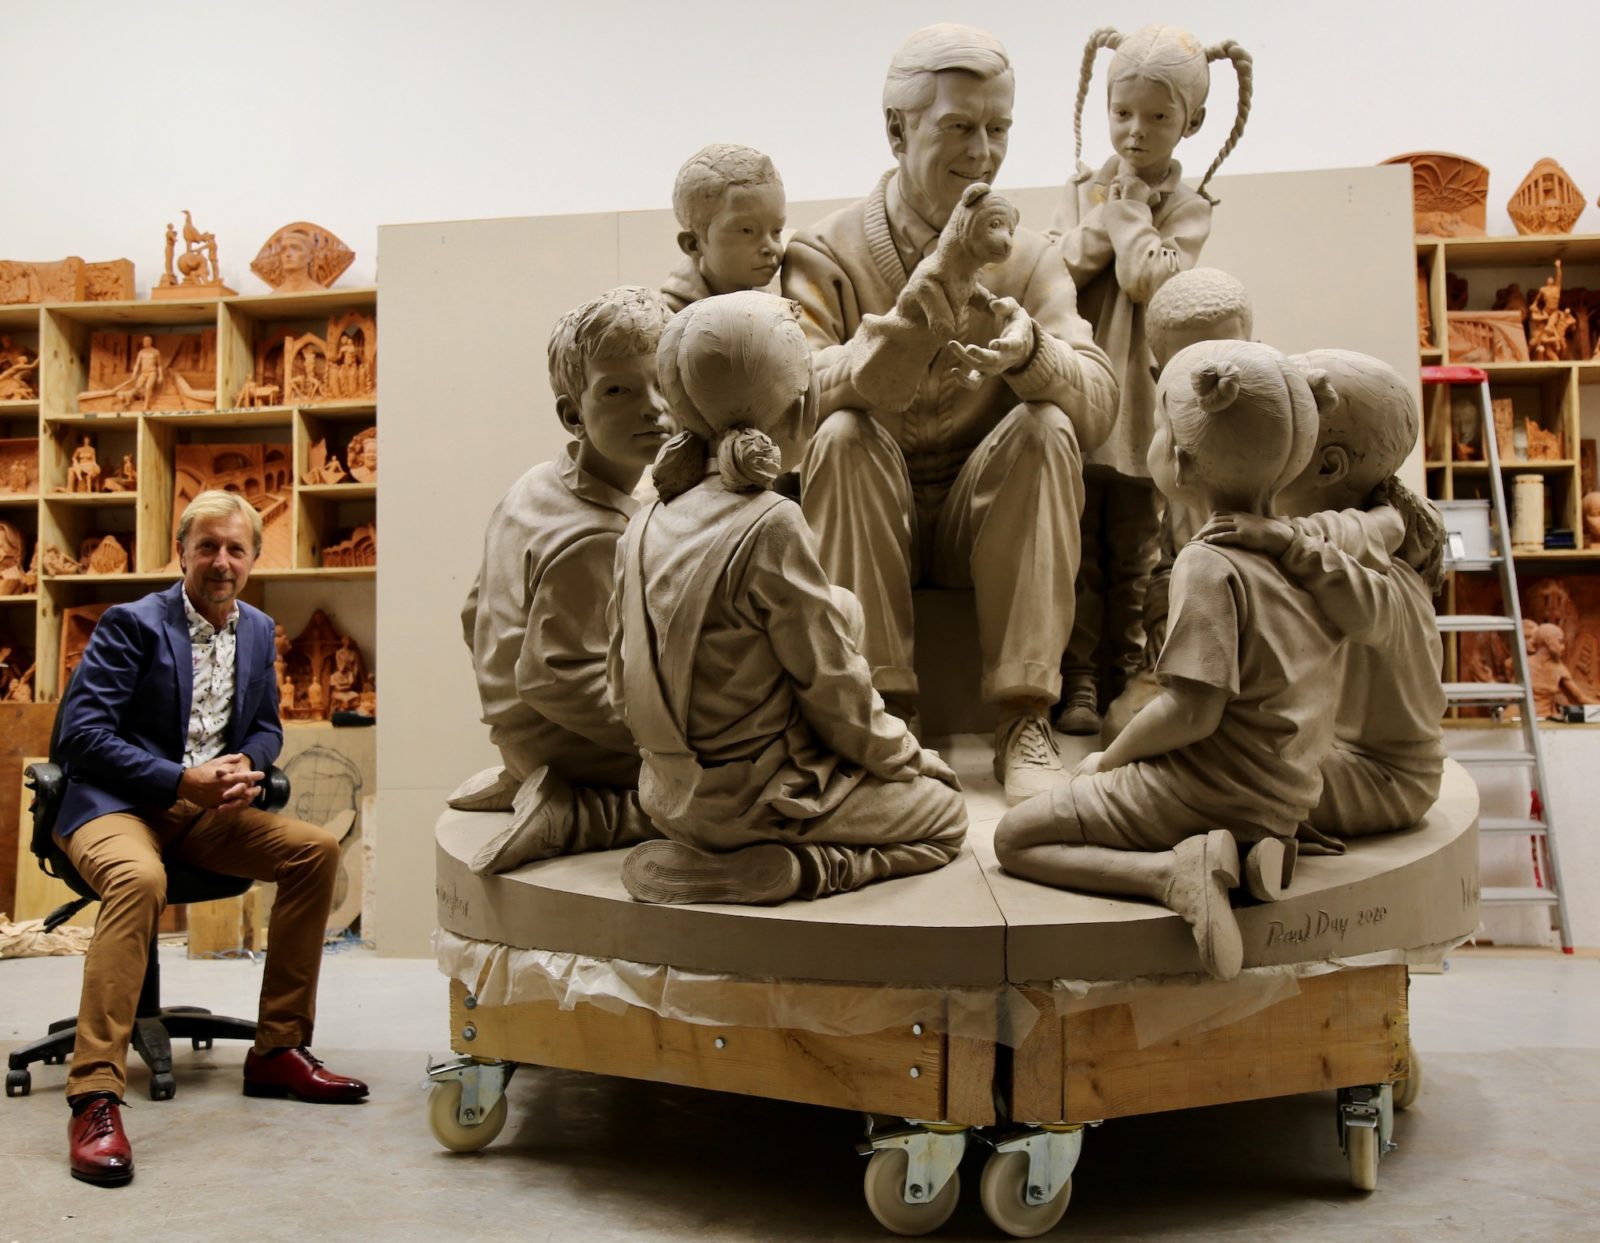 Paul day sits next to "A Beautiful for a Neighbor" statue featureing Mister Rogers, his puppets, and children.